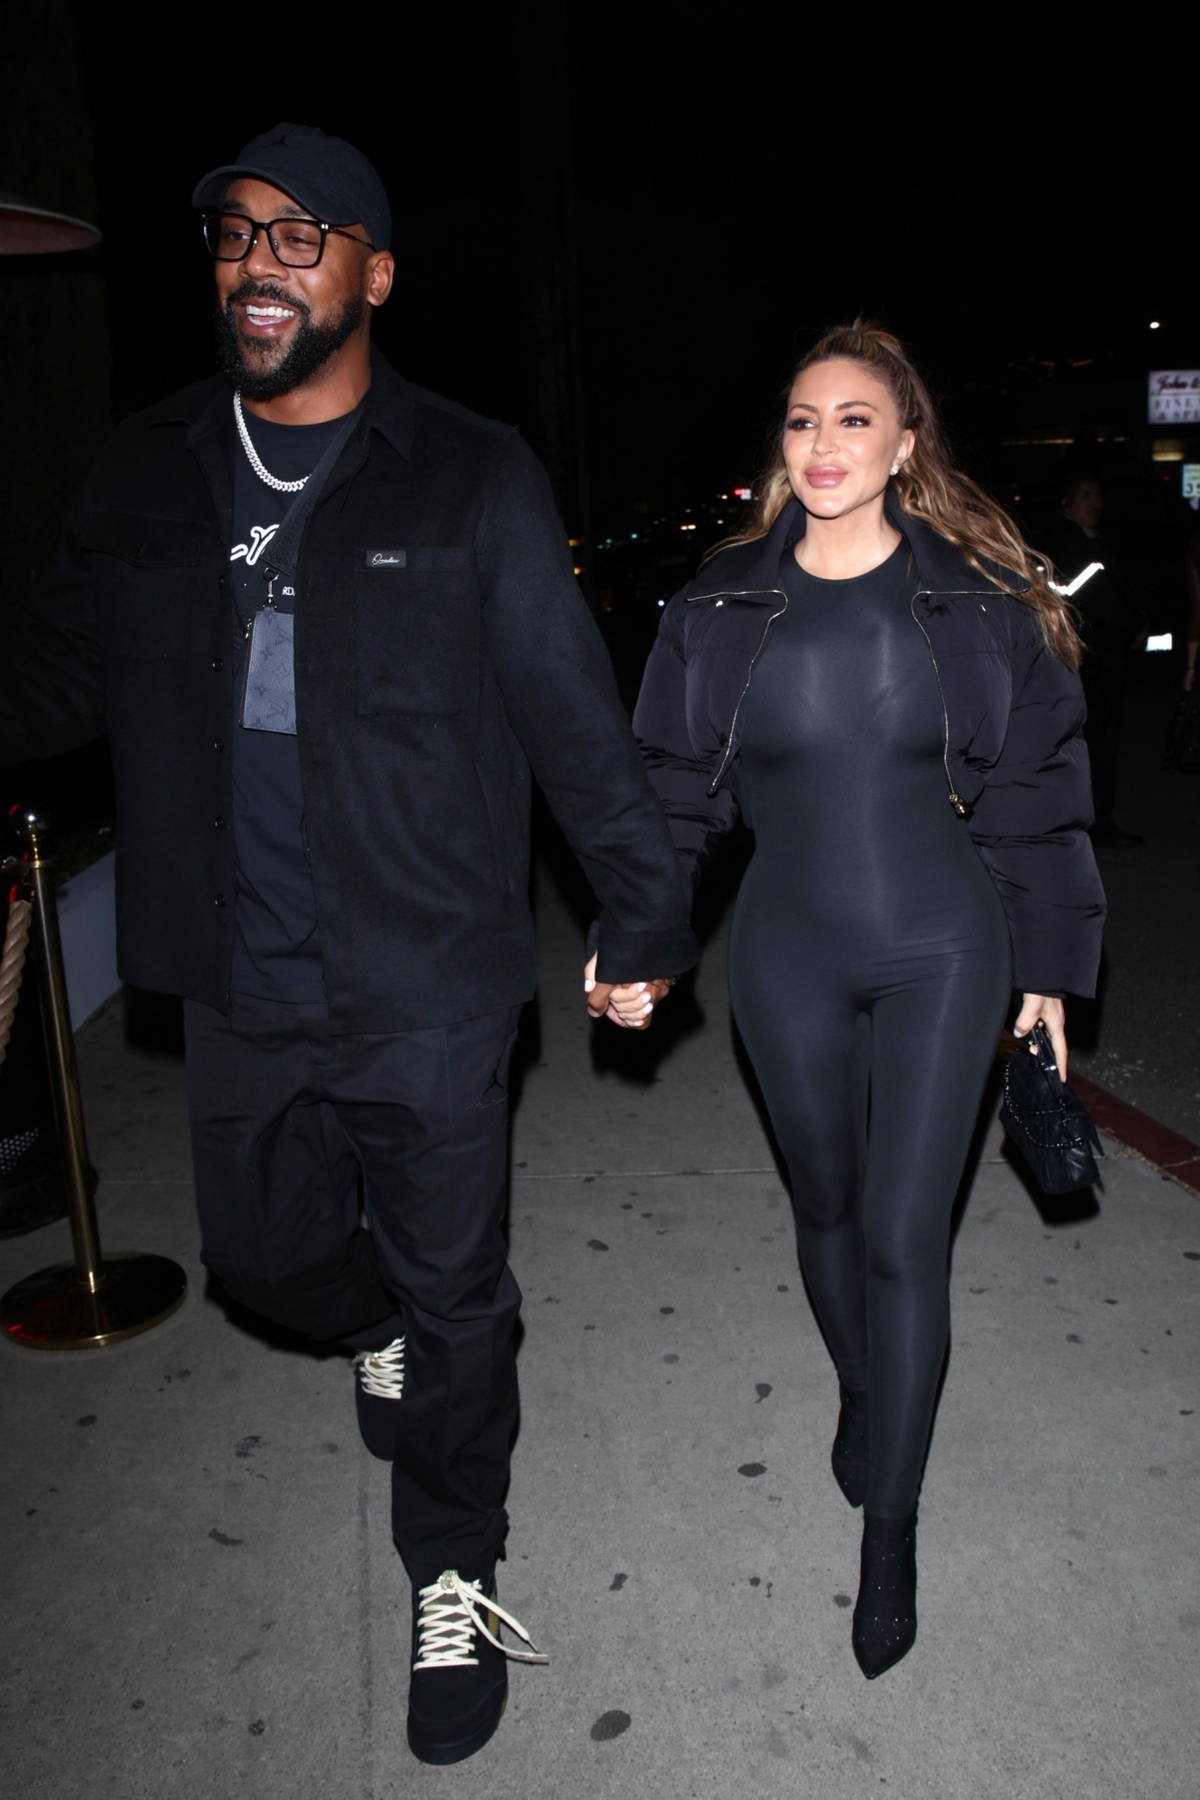 Larsa Pippen shows off her curvy figure in a black bodysuit during